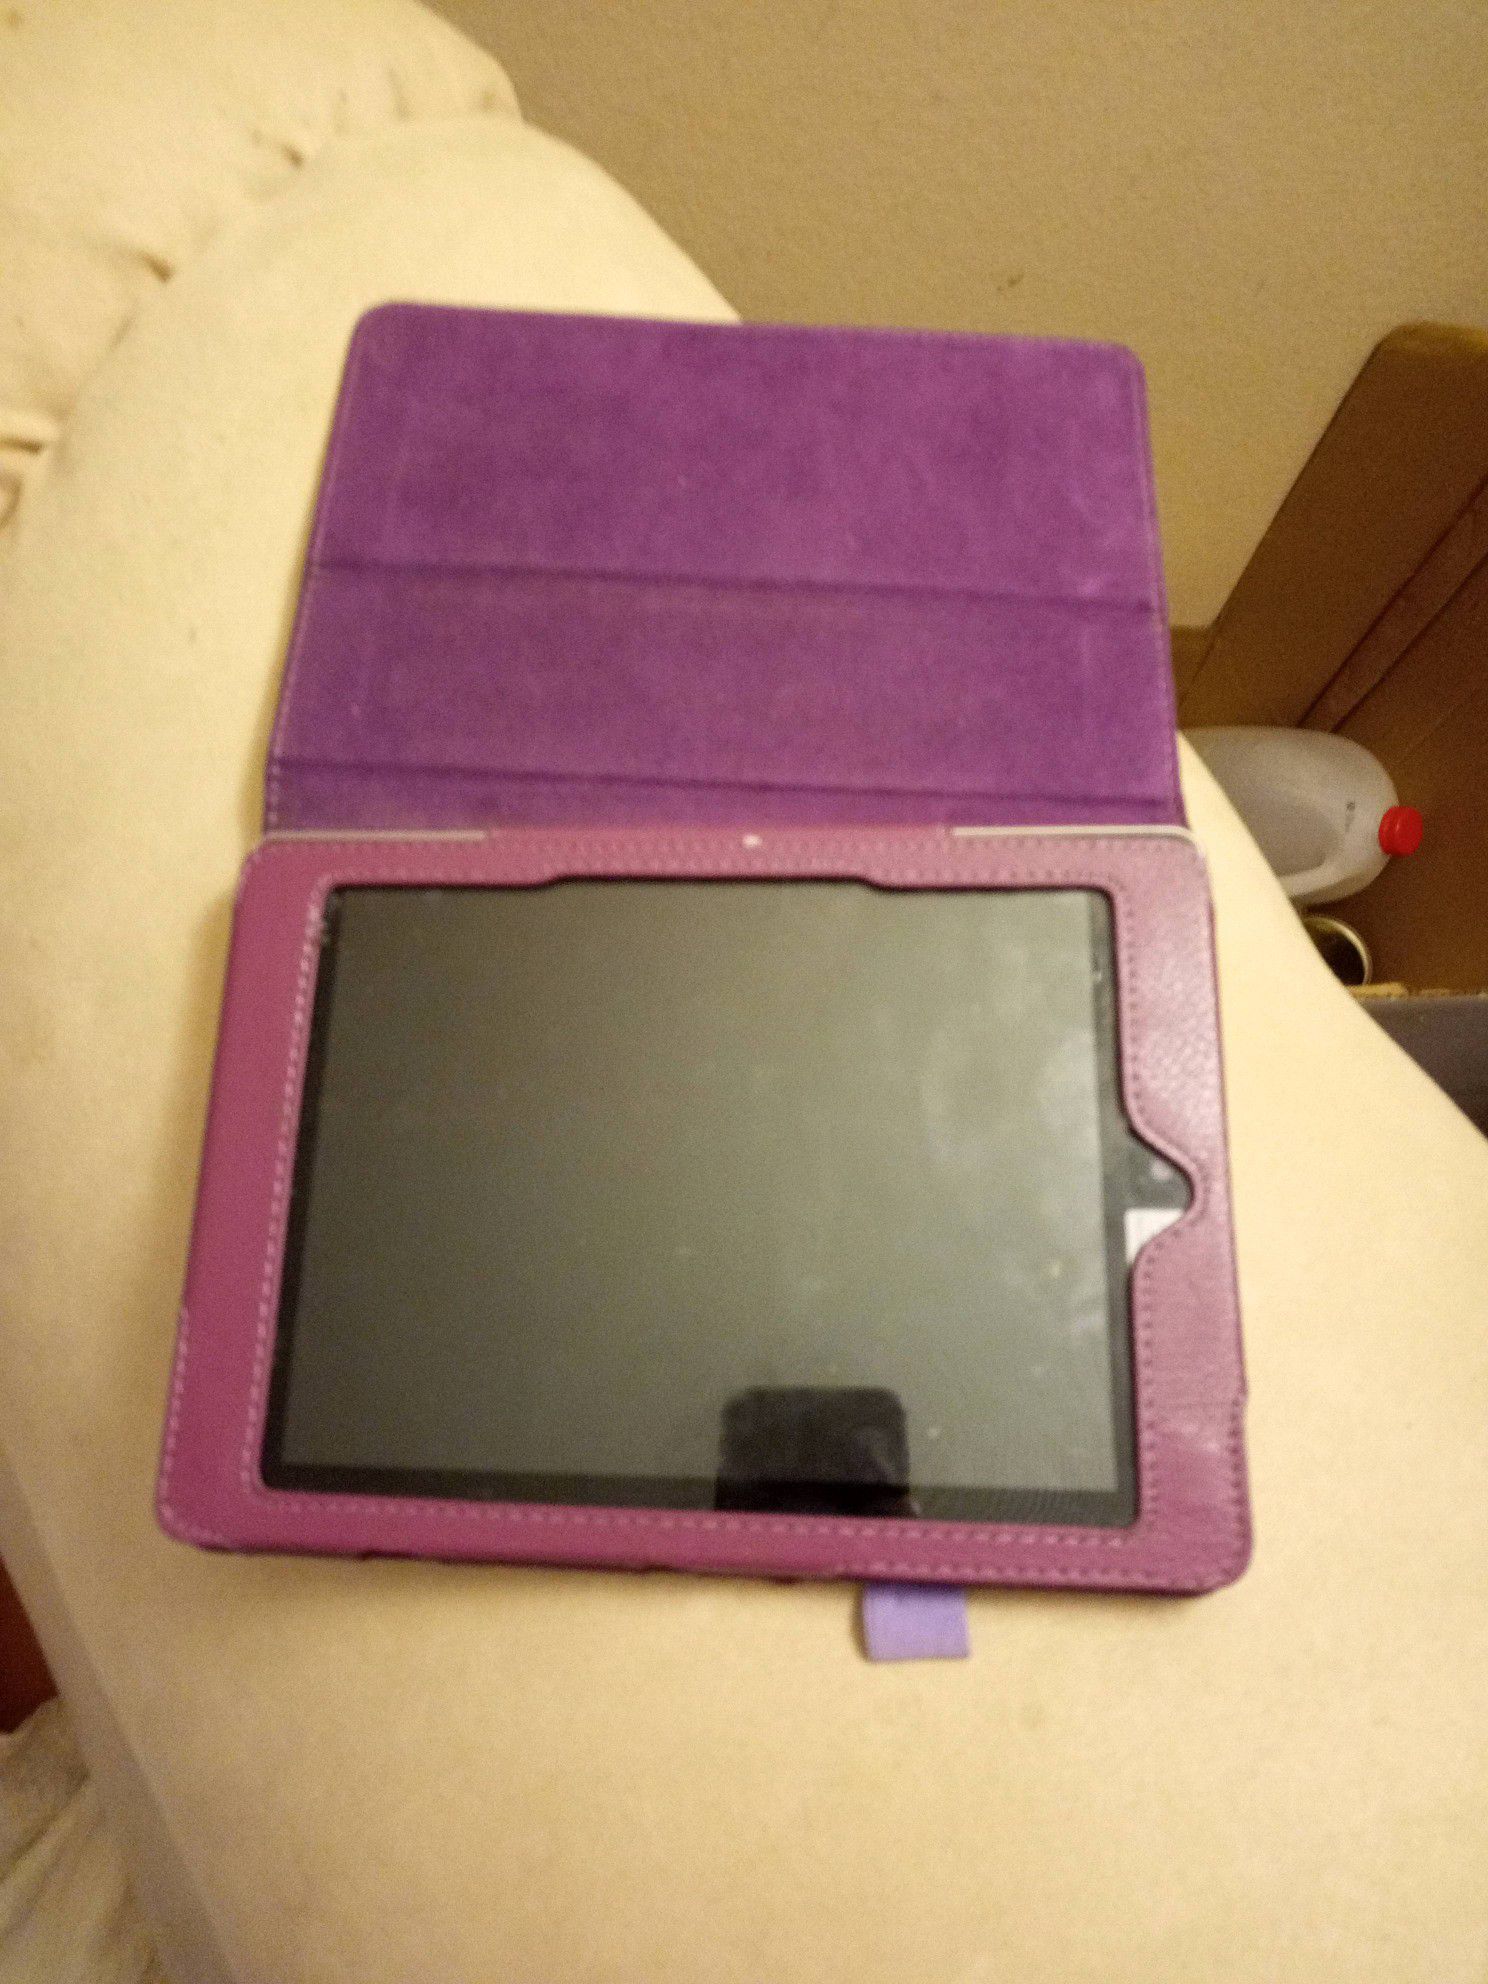 Acer tablet with case